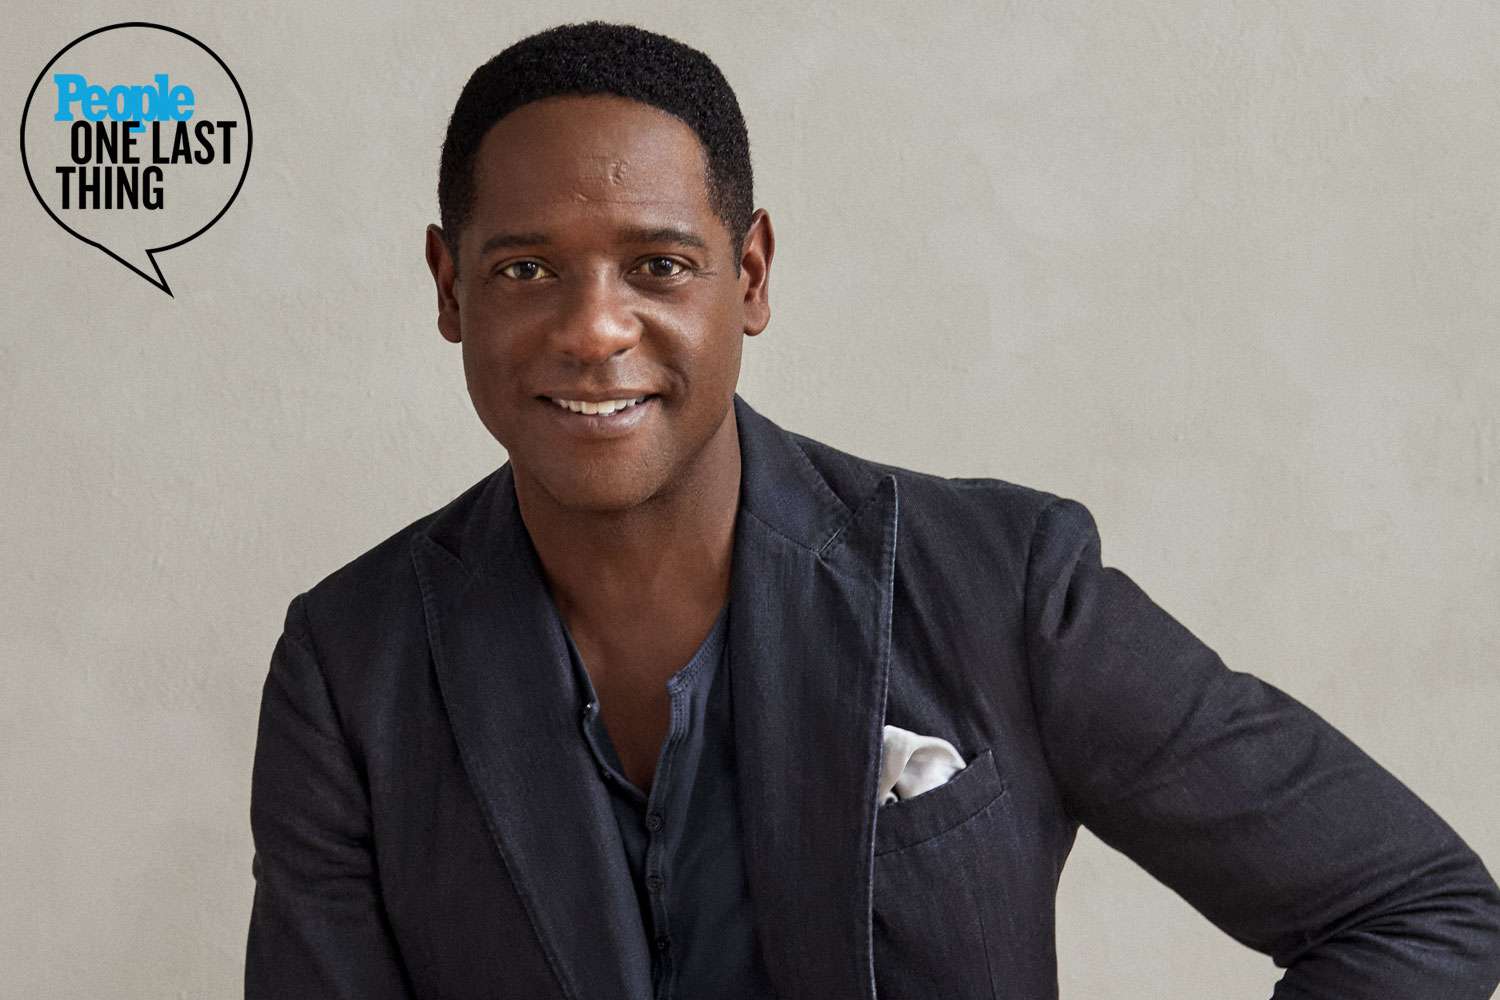 One Last Thing with Blair Underwood: A Year After His Wedding, ‘Every Day Is Like a Date’ with Wife Josie (Exclusive)